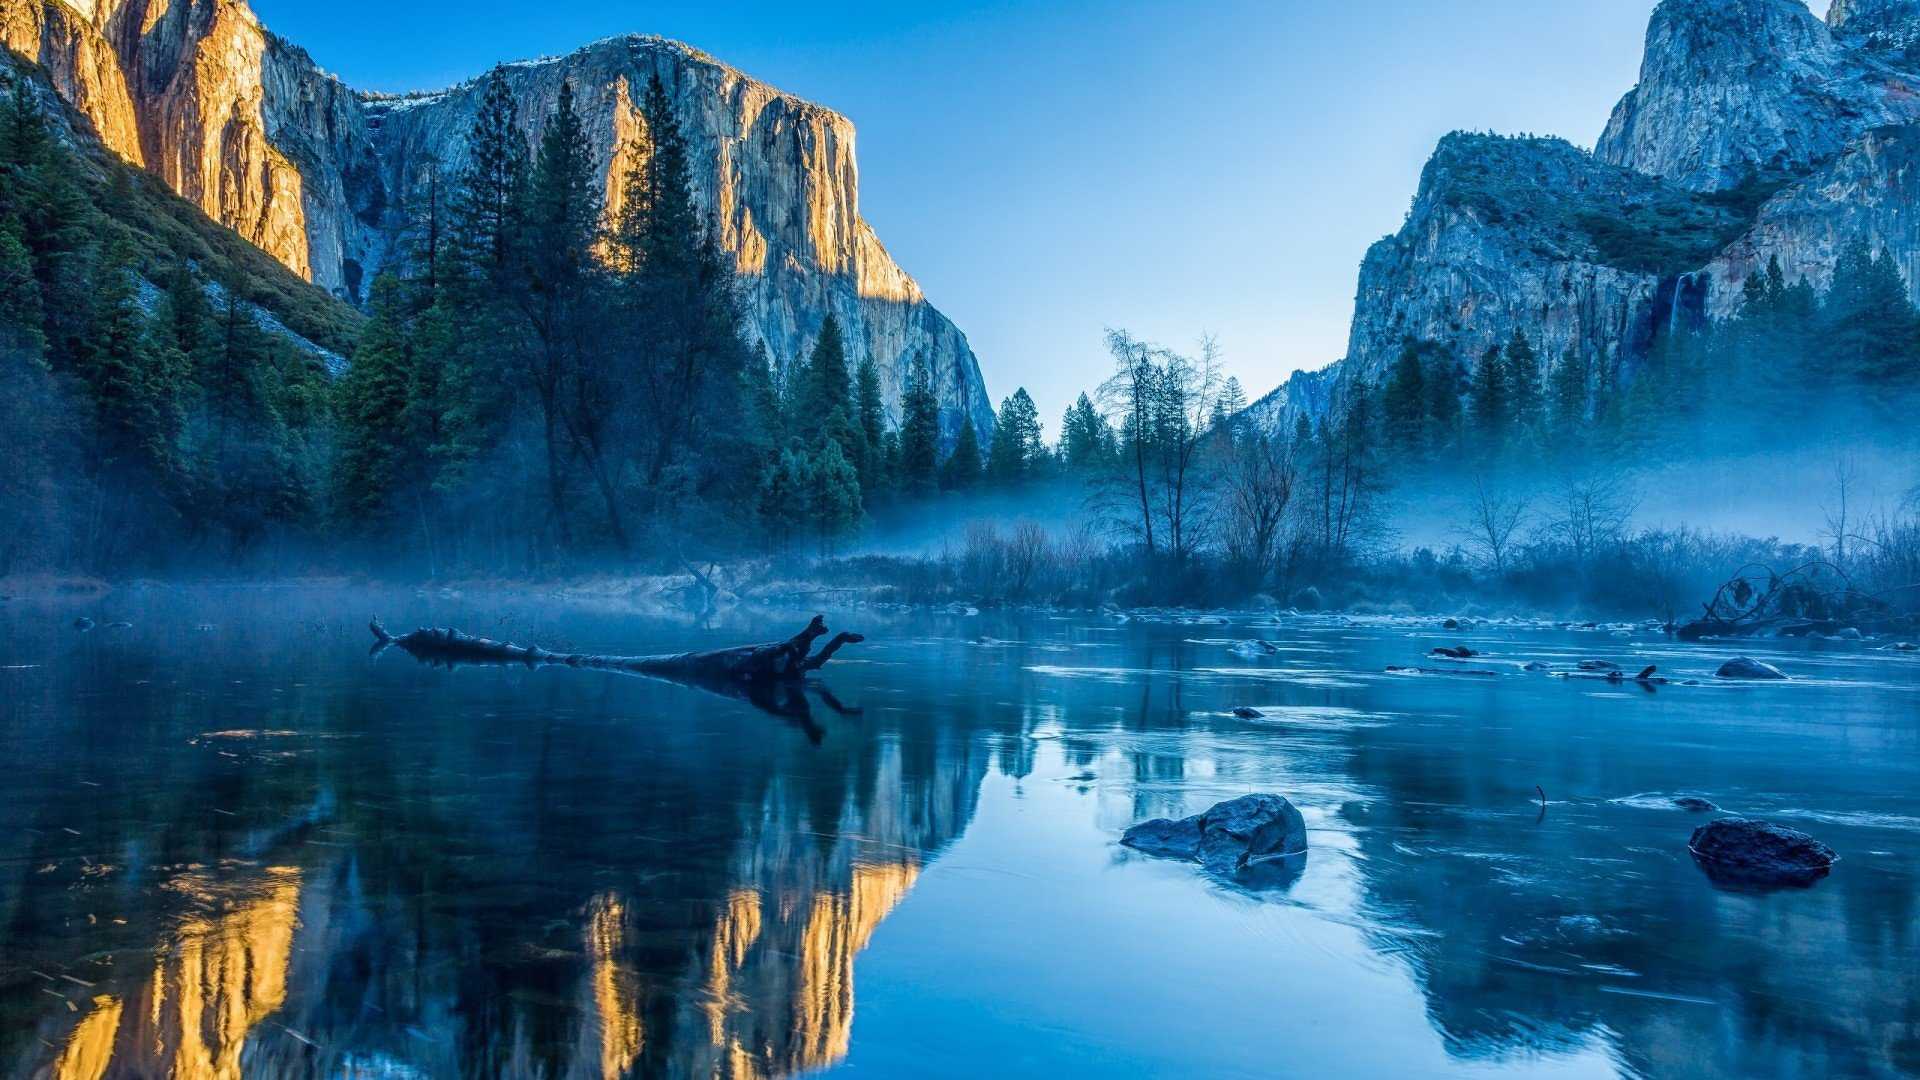 osx yosemite wallpaper how to get photo to look like